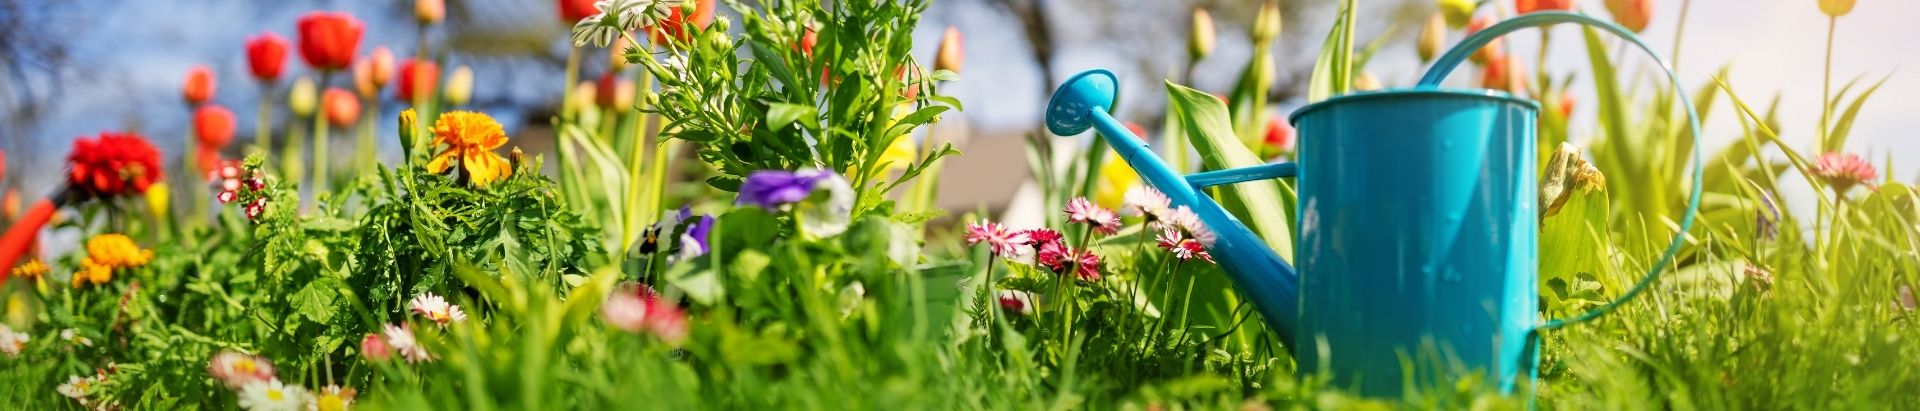 How To Look After Your Garden In Summer | Qwickhose